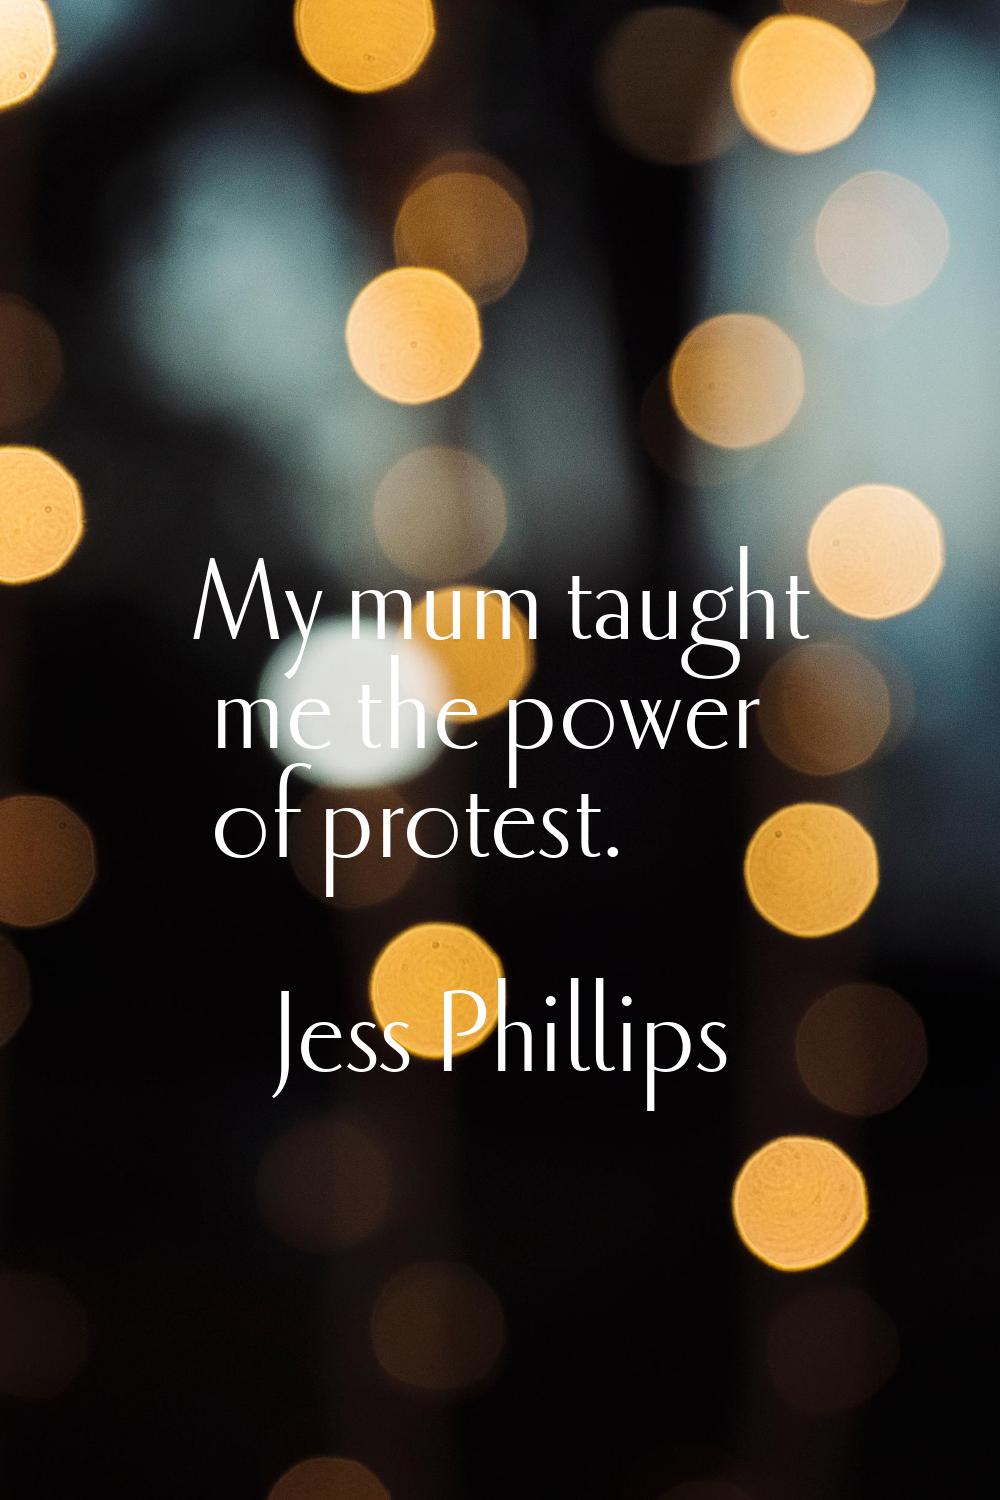 My mum taught me the power of protest.